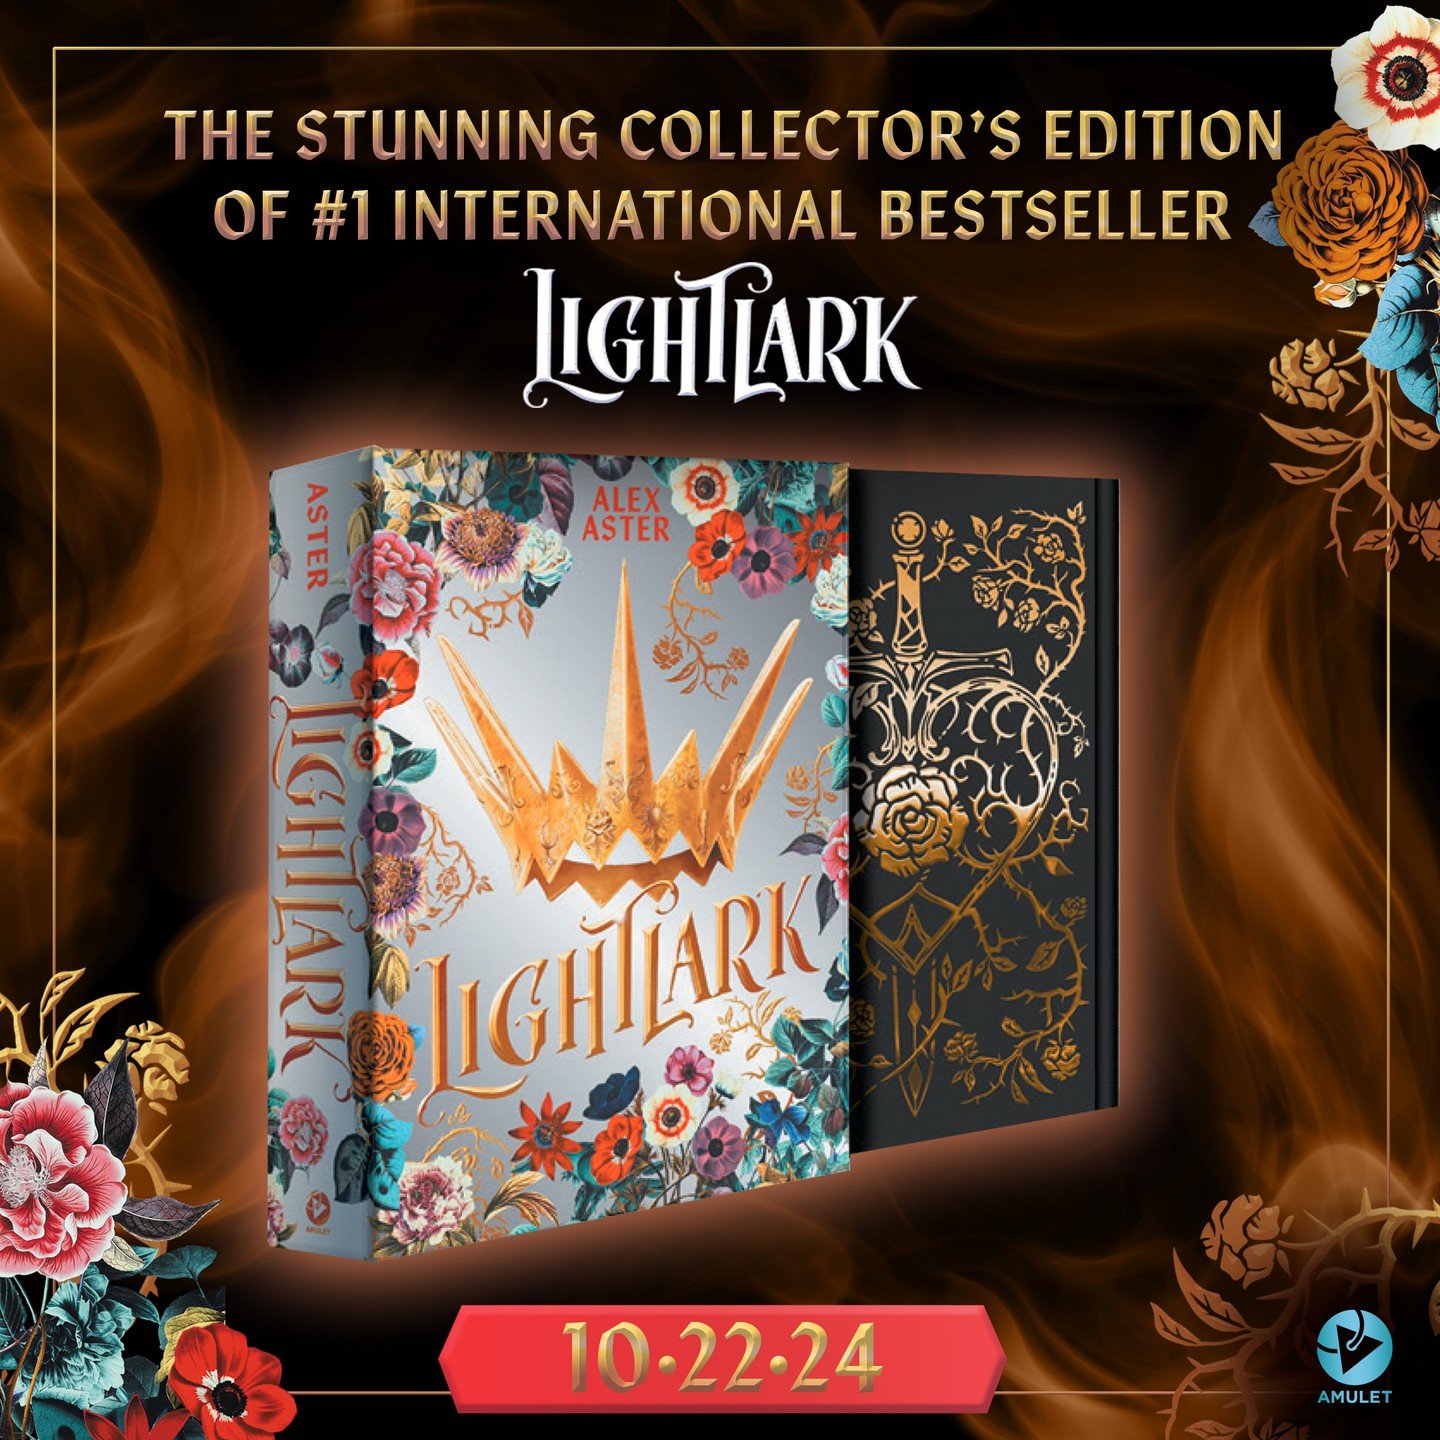 This stunning collector's edition of the bestseller&mdash;and first book in the beloved Lightlark Saga&mdash;from award-winning author @alexaster includes a suite of sensational features:
 
- Premium metallic slipcase
- Satin cover with foil stamping